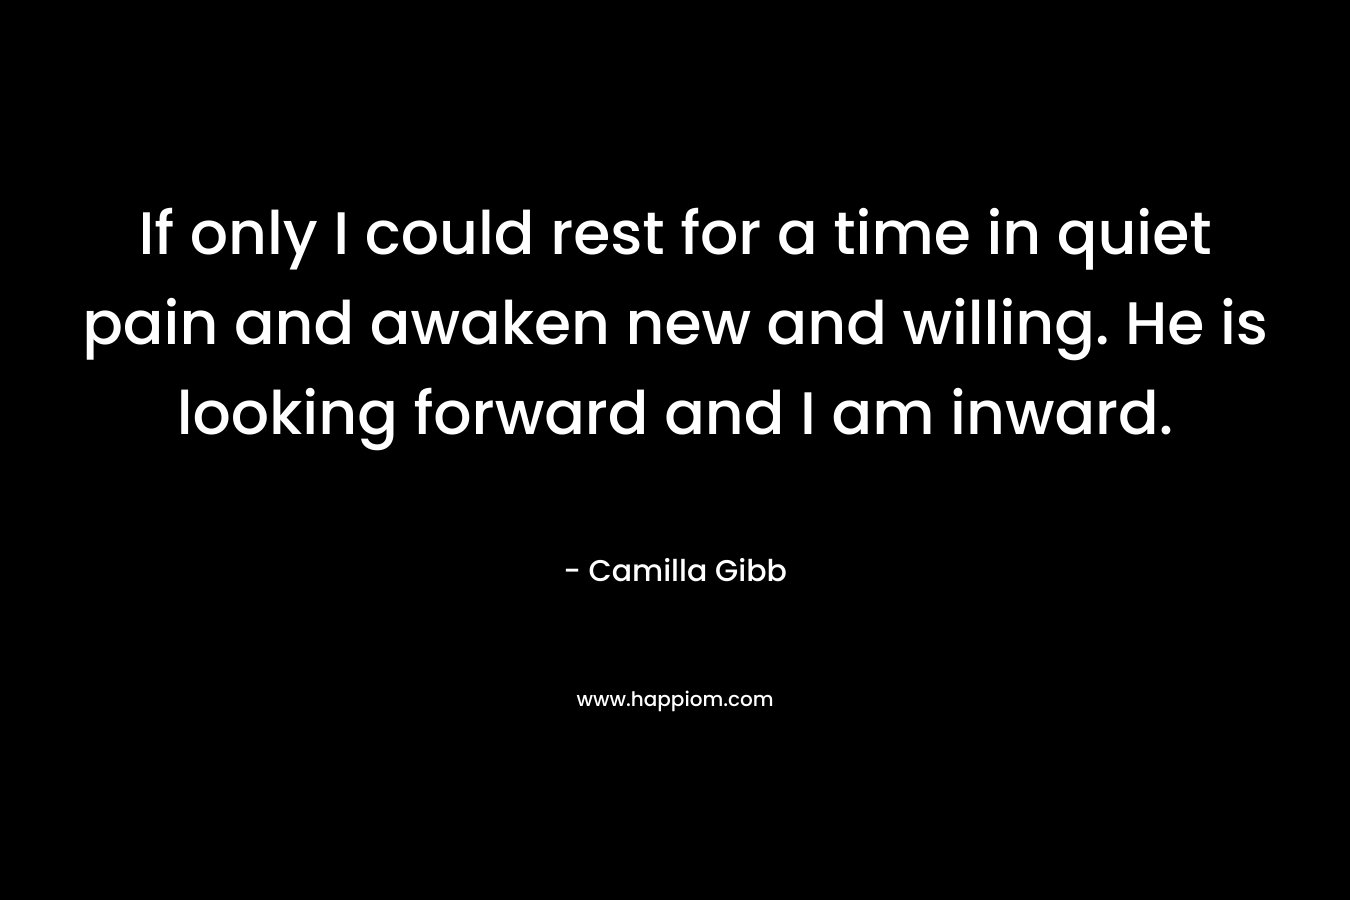 If only I could rest for a time in quiet pain and awaken new and willing. He is looking forward and I am inward.